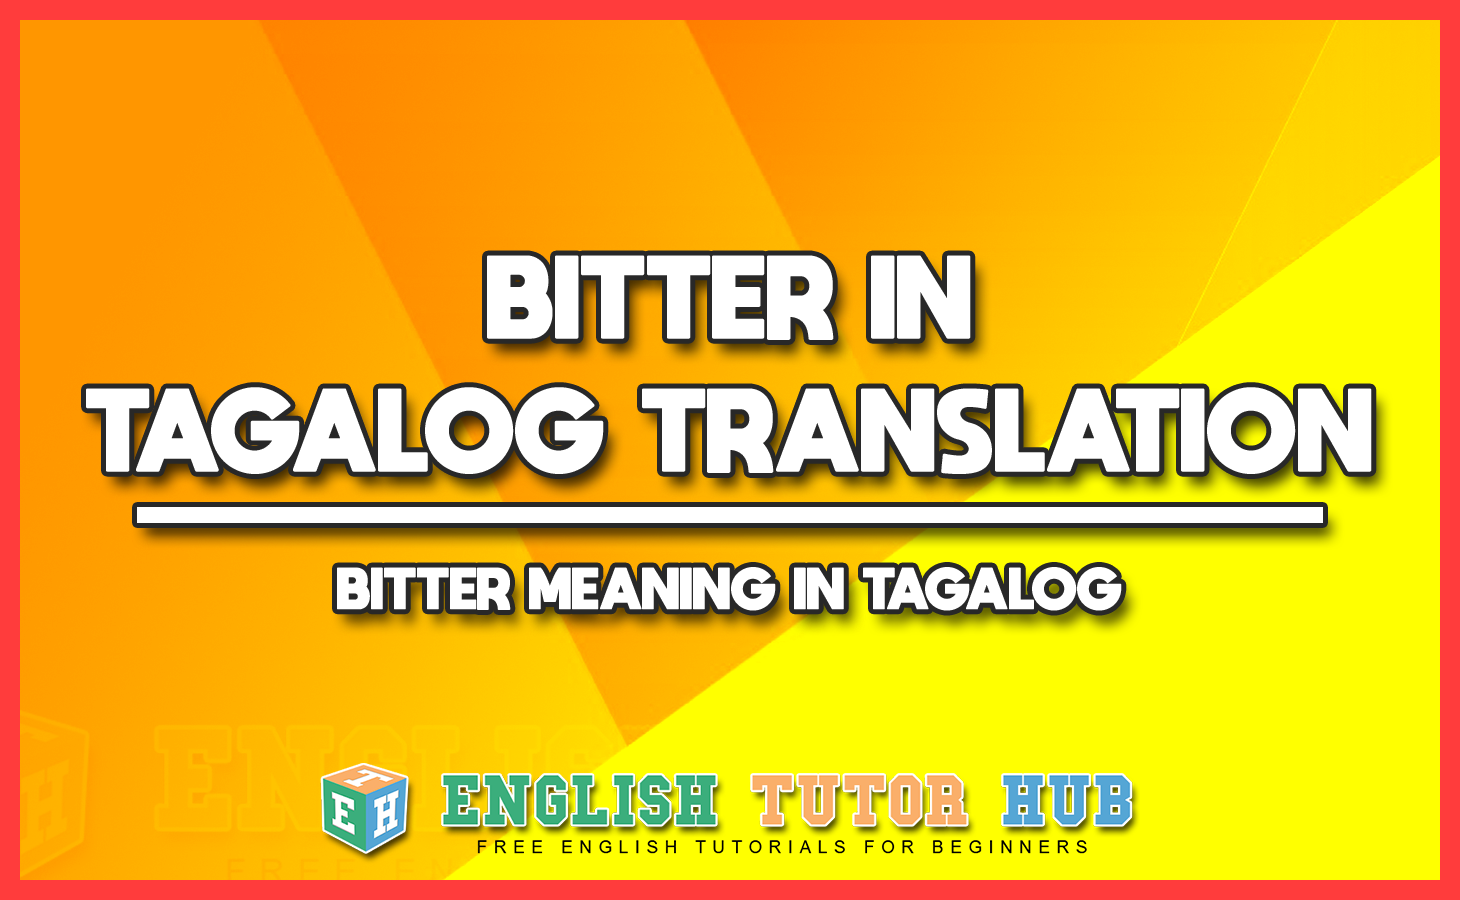 BITTER IN TAGALOG TRANSLATION - BITTER MEANING IN TAGALOG